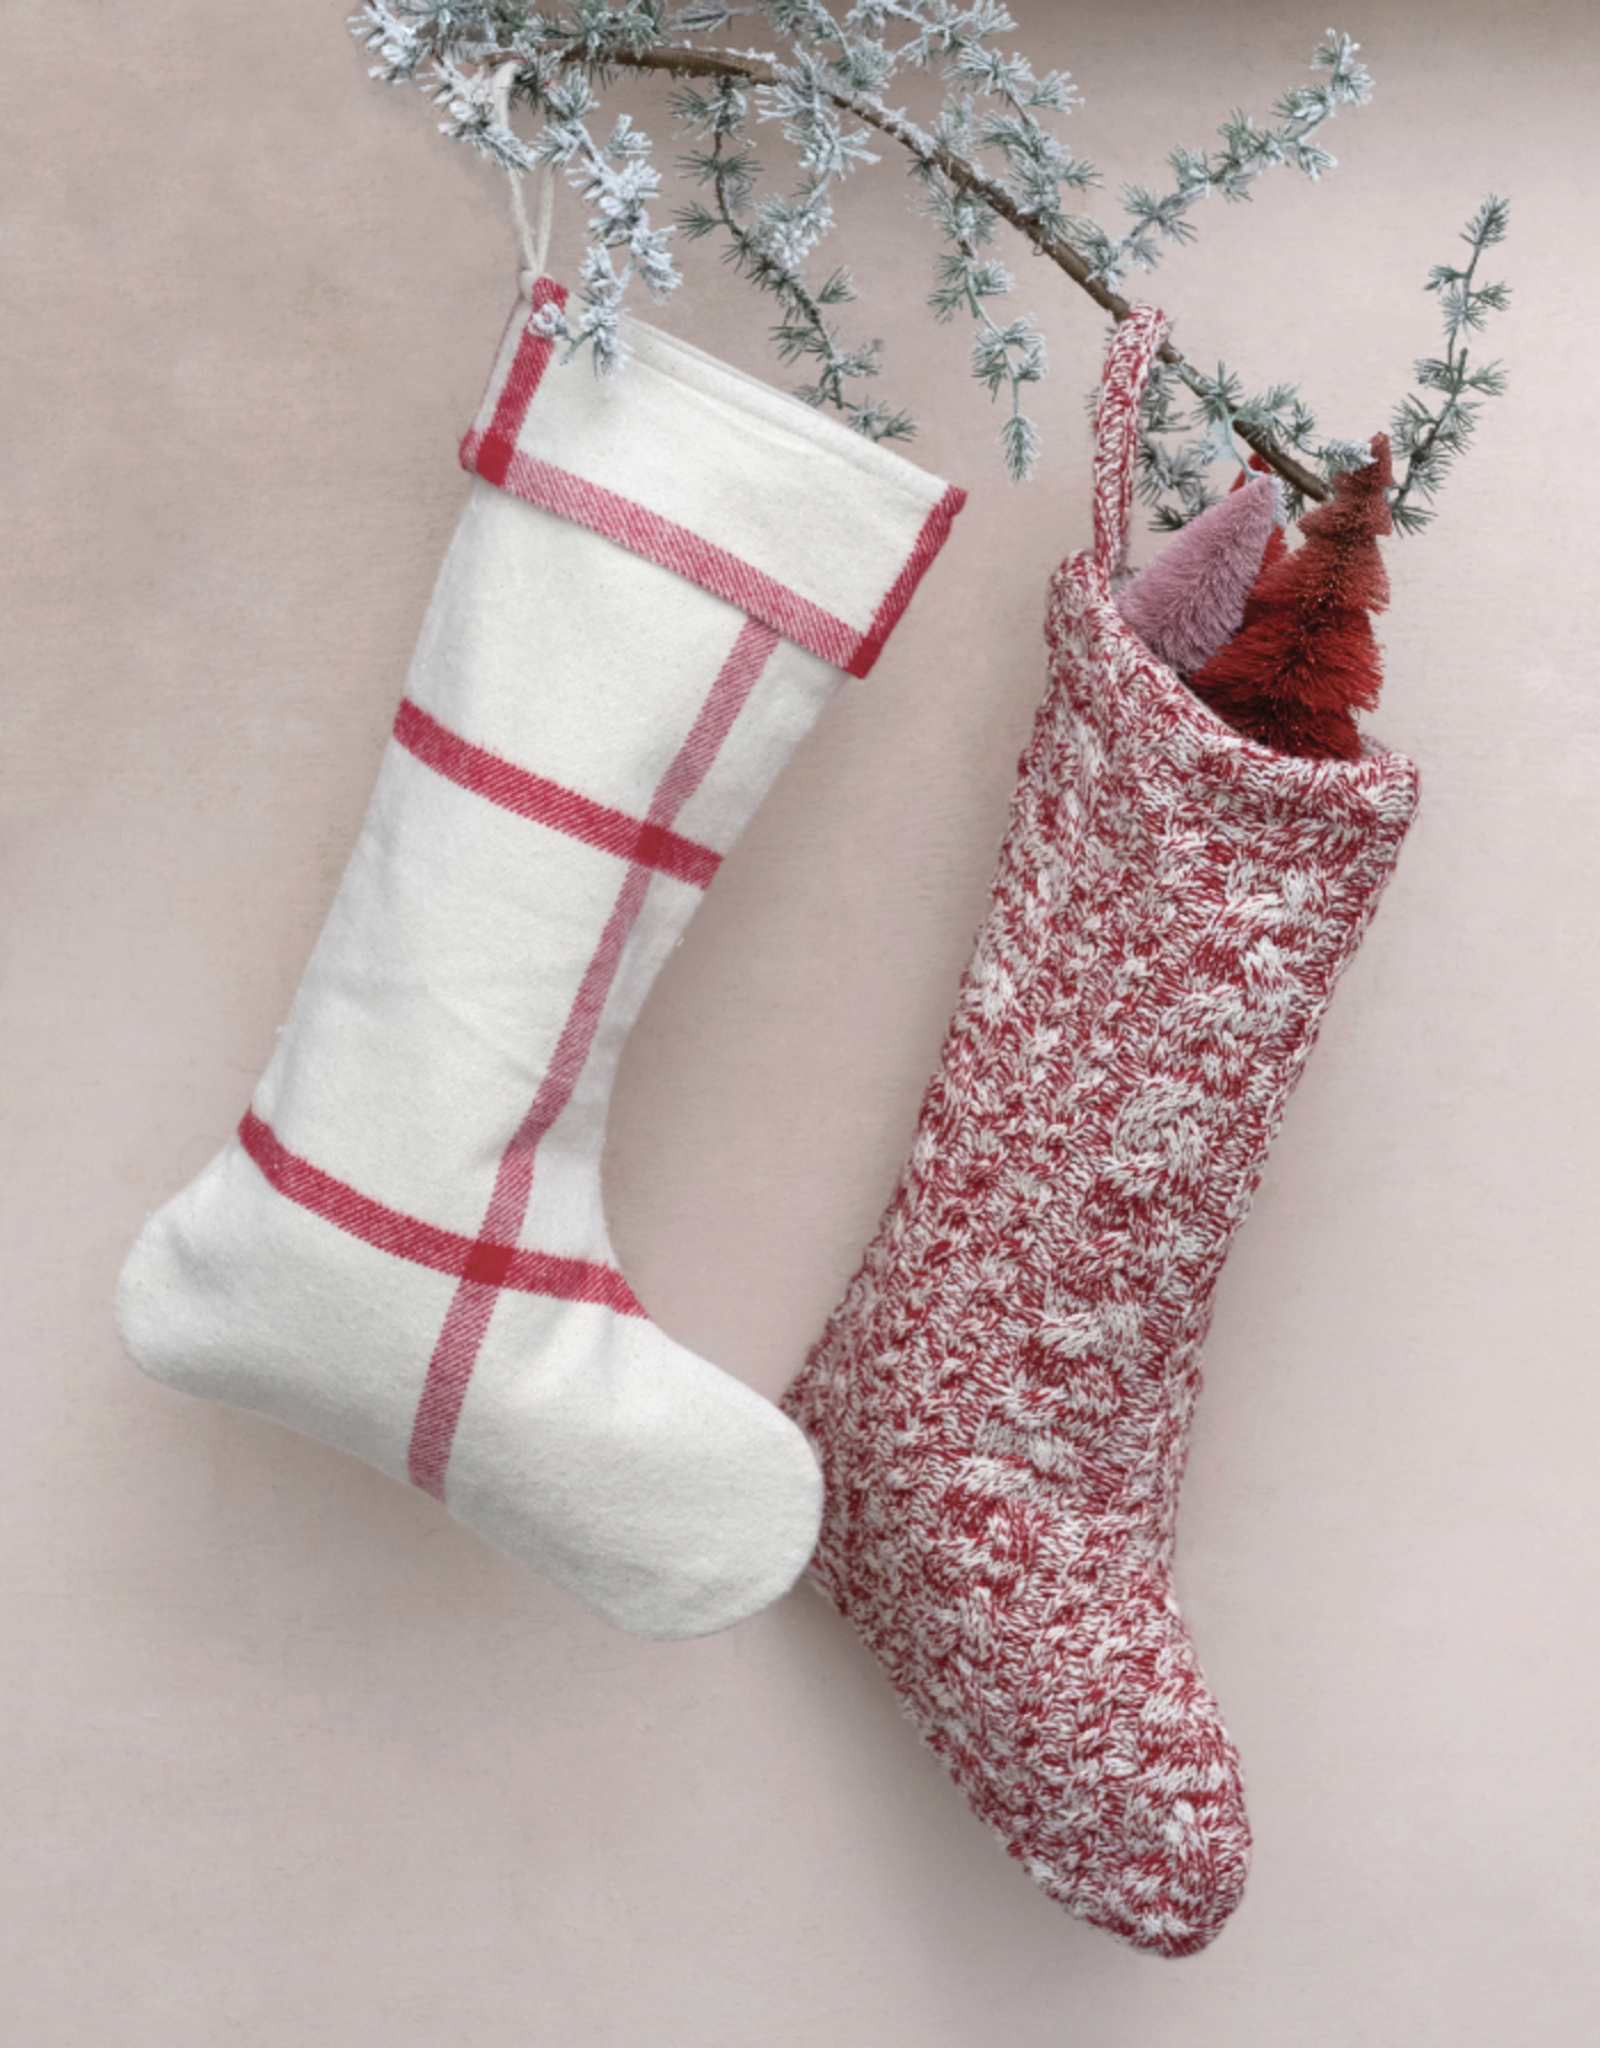 20"H Cotton Flannel Stocking with Grid Pattern, Cream Color and Red